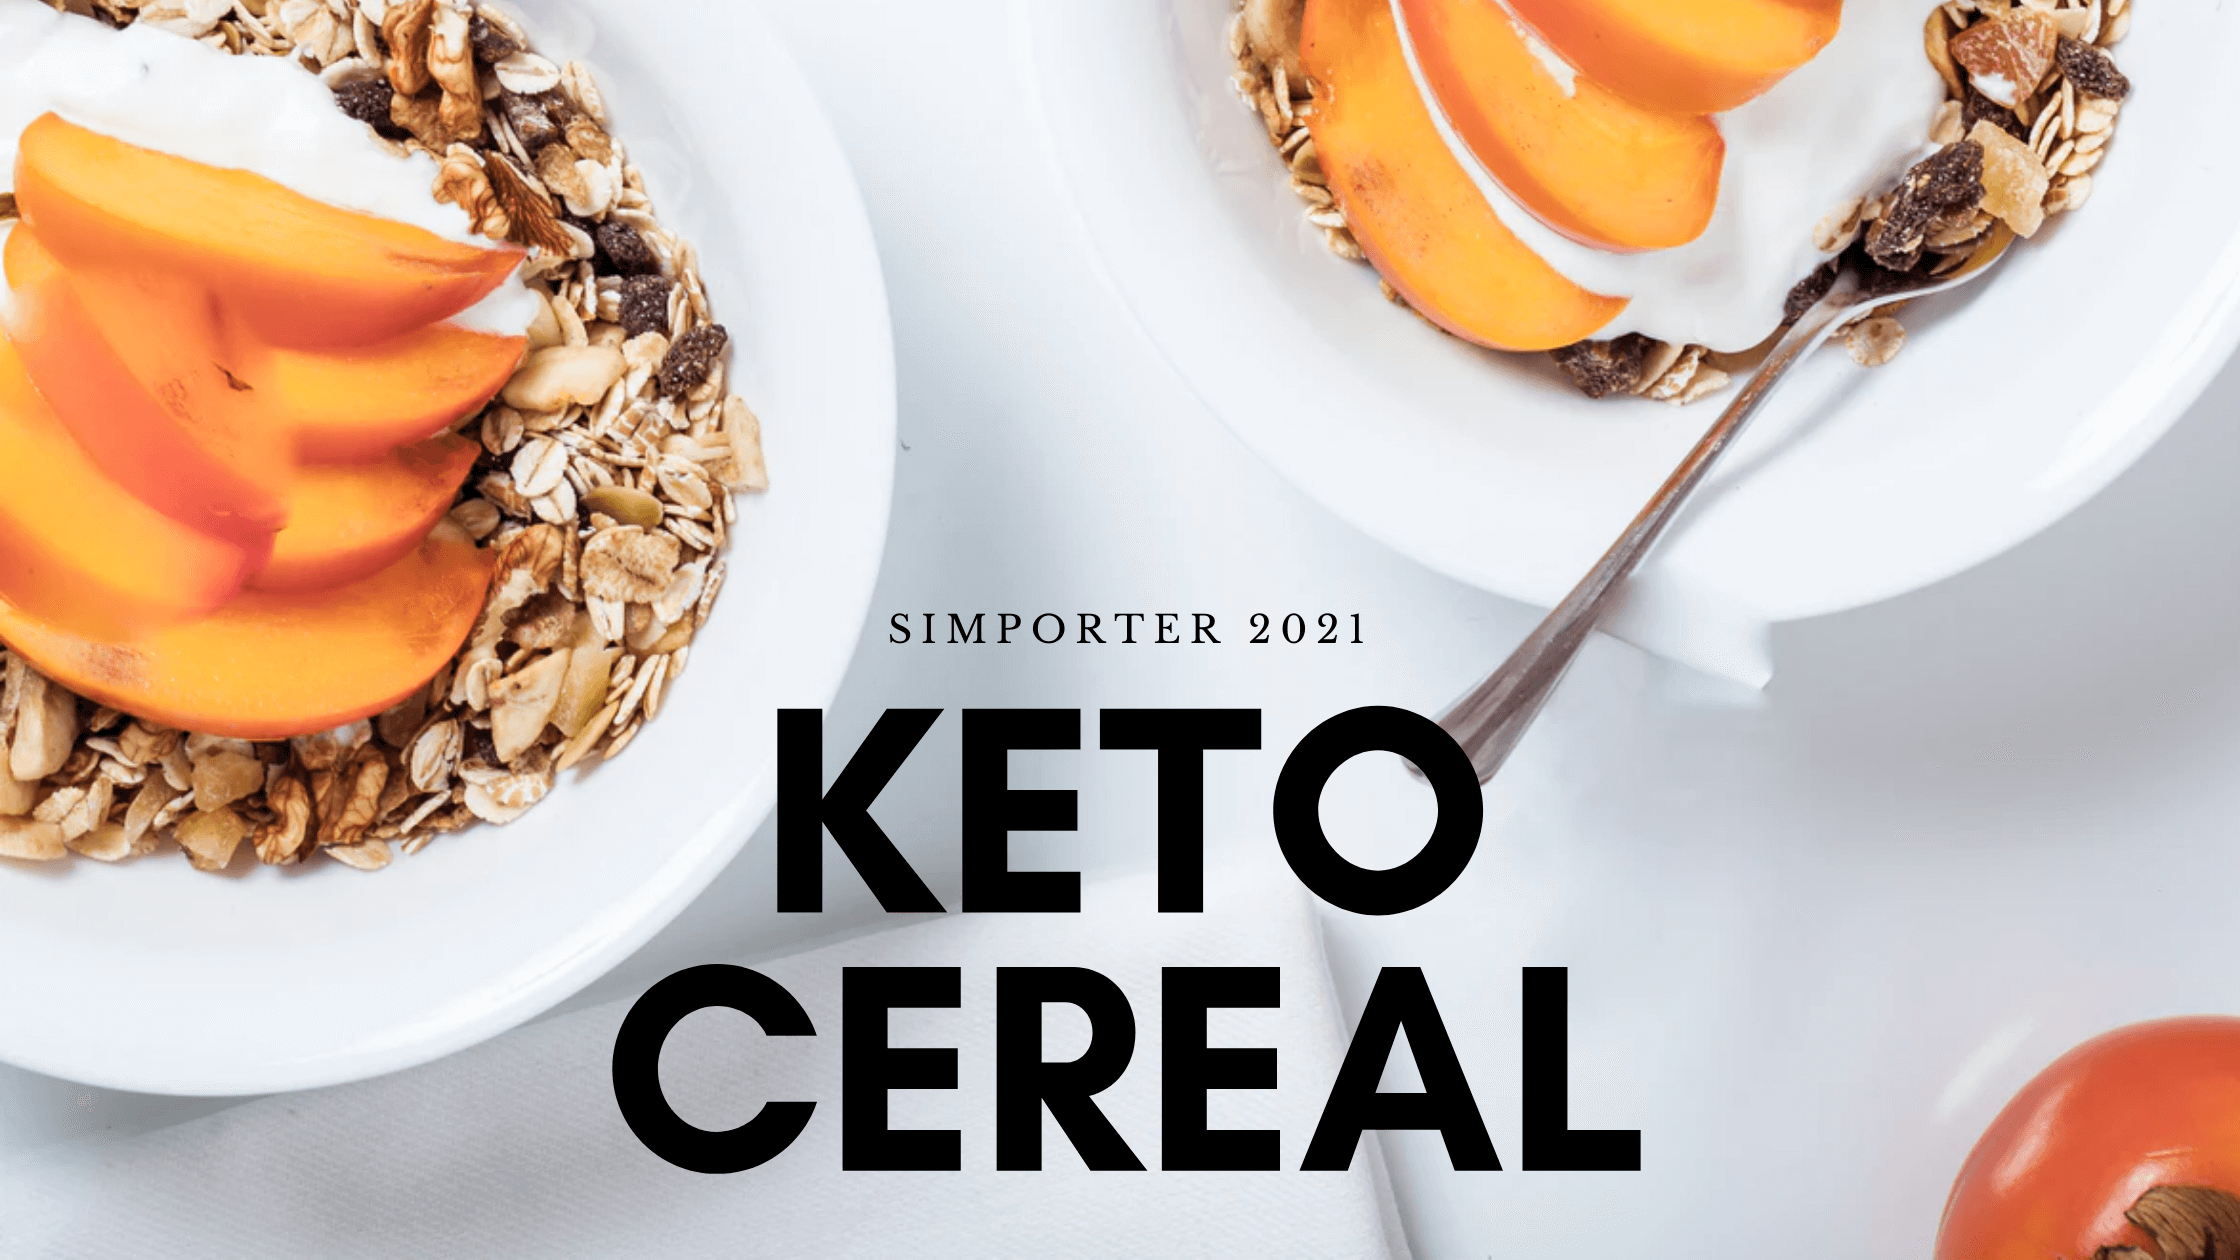 2021 Trends in Cereal Category - Keto Cereals Niches Players | Simporter